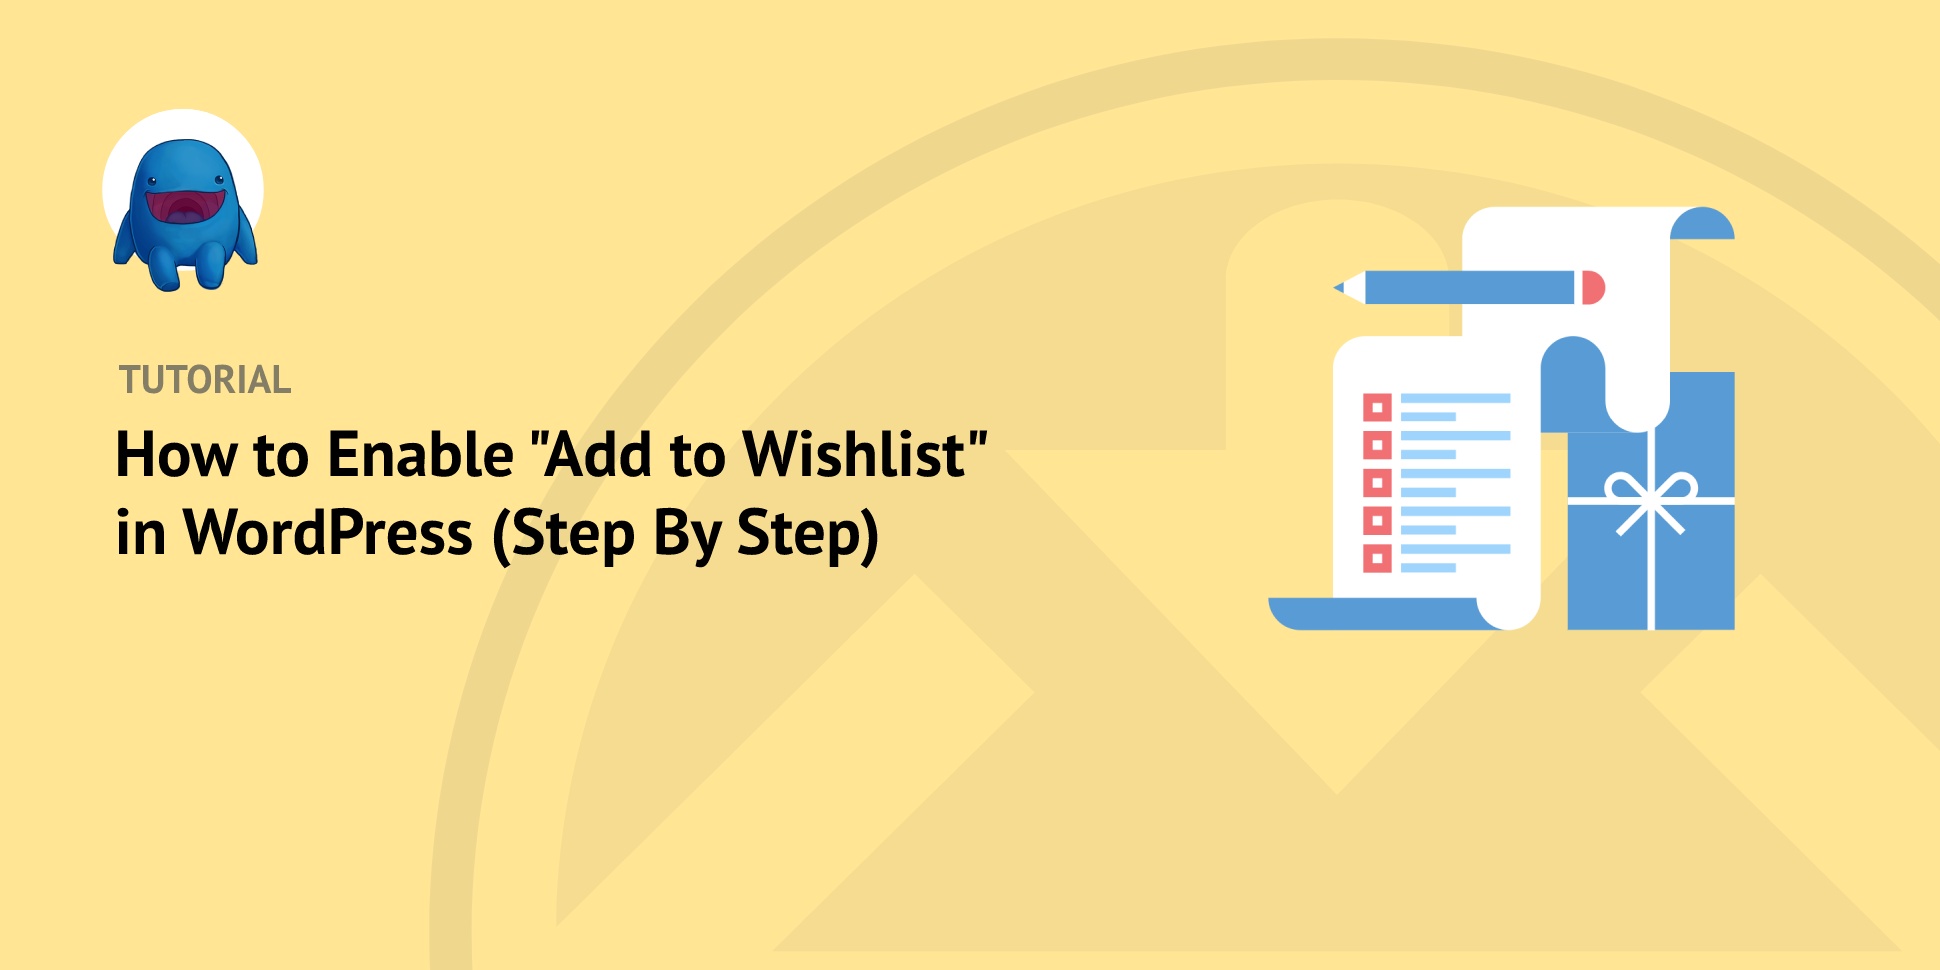 How to Enable "Add to Wishlist" in WordPress